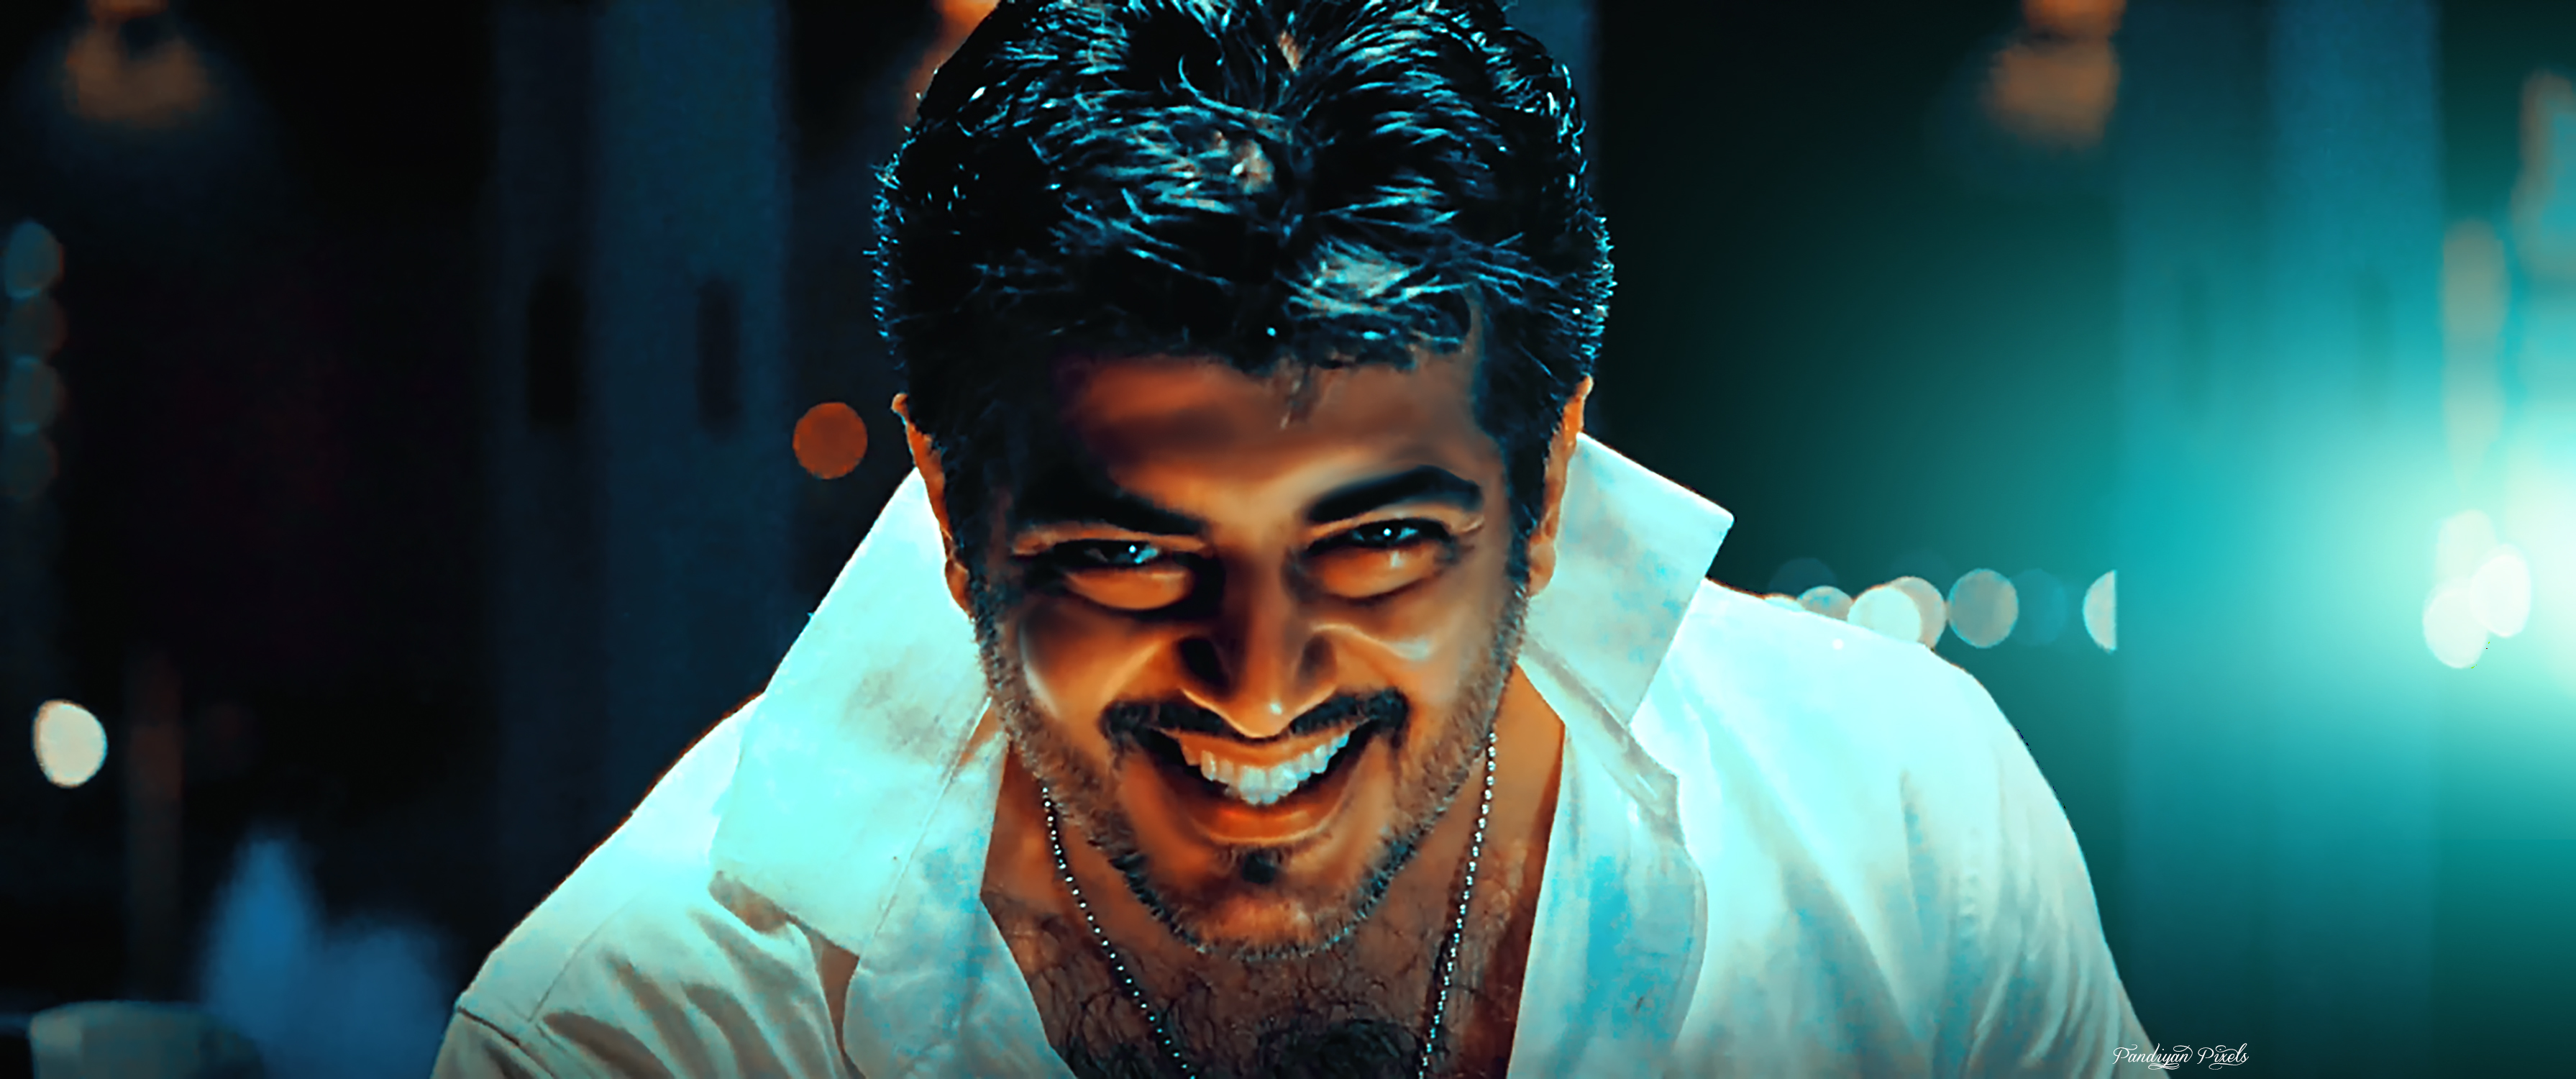 Mankatha Picture - Image Abyss